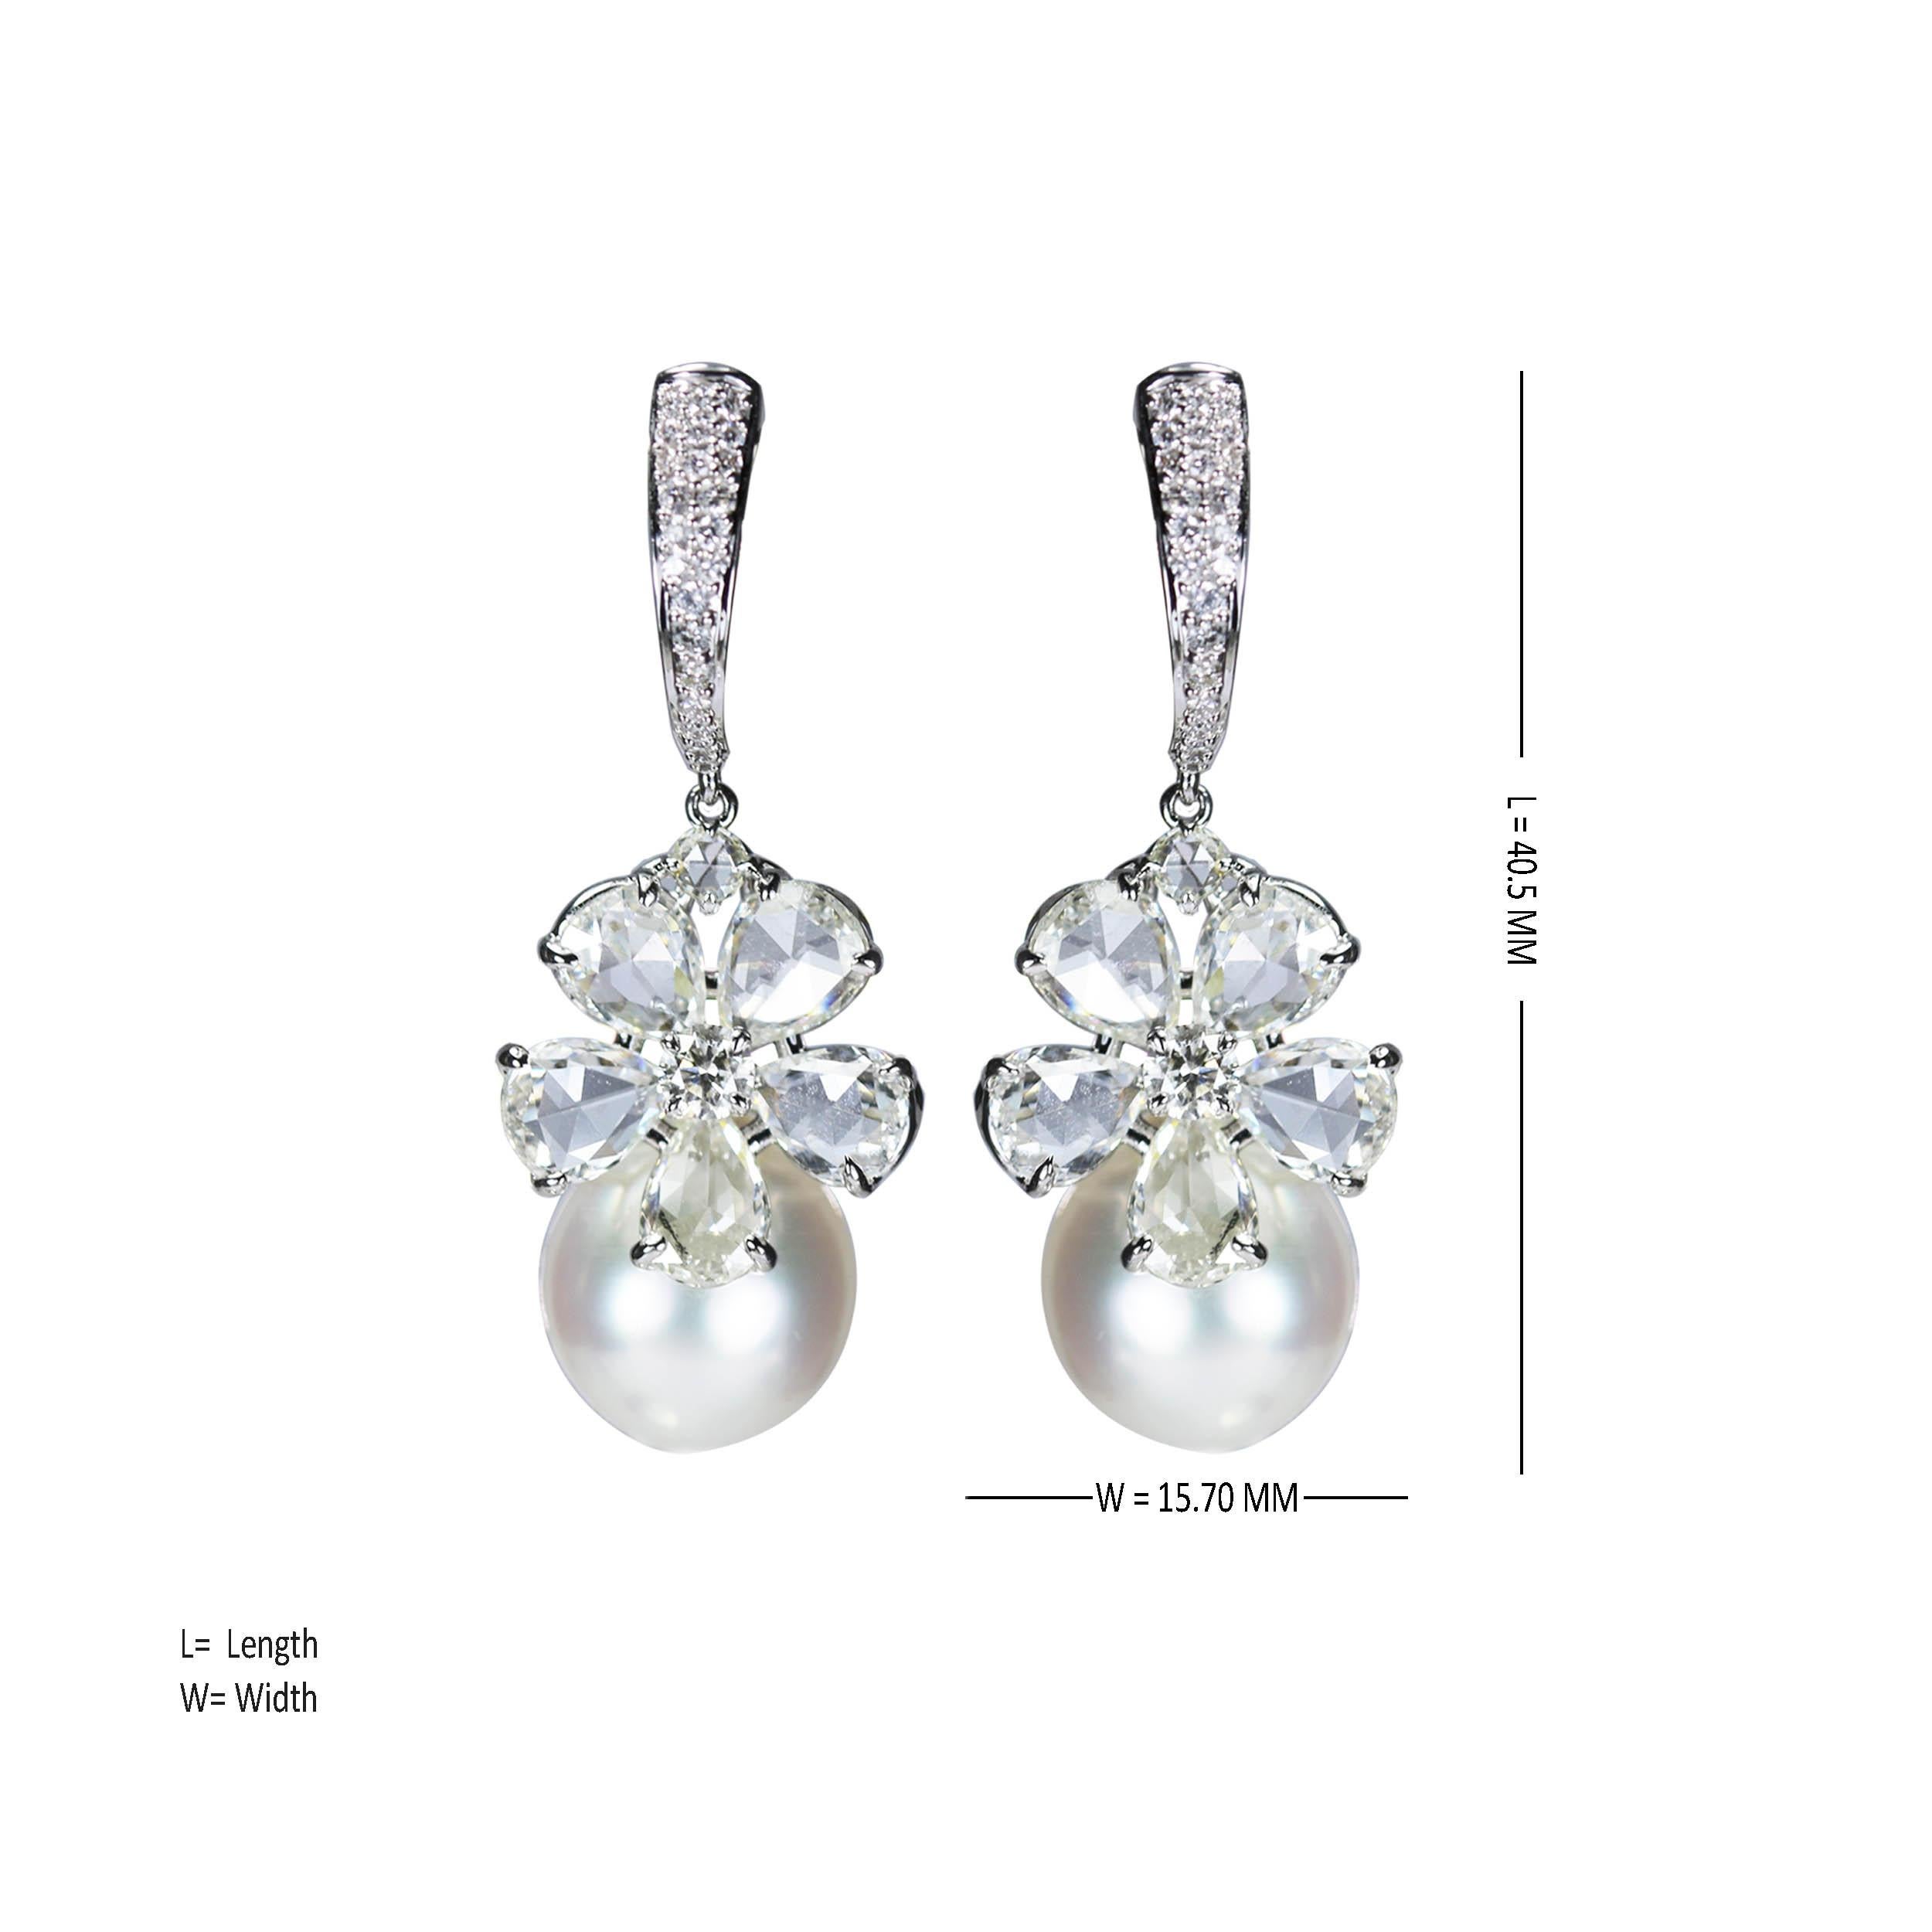 Studio Rêves Rose cut Diamonds and South Sea Pearls Earrings in 18K Gold In New Condition For Sale In Mumbai, Maharashtra